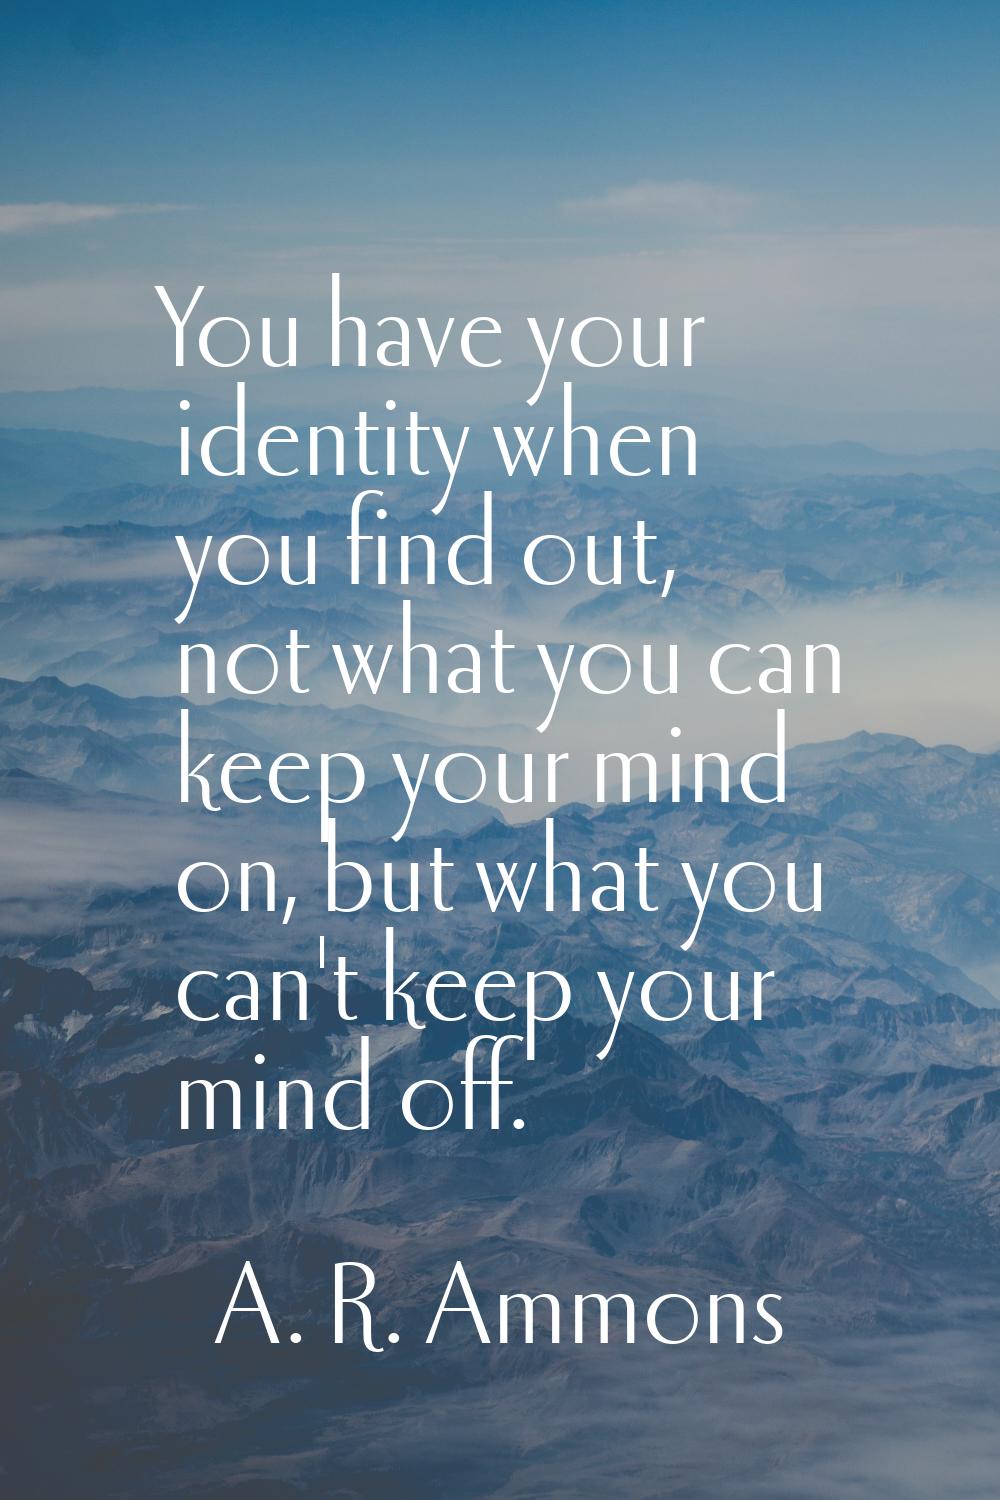 You have your identity when you find out, not what you can keep your mind on, but what you can't ke